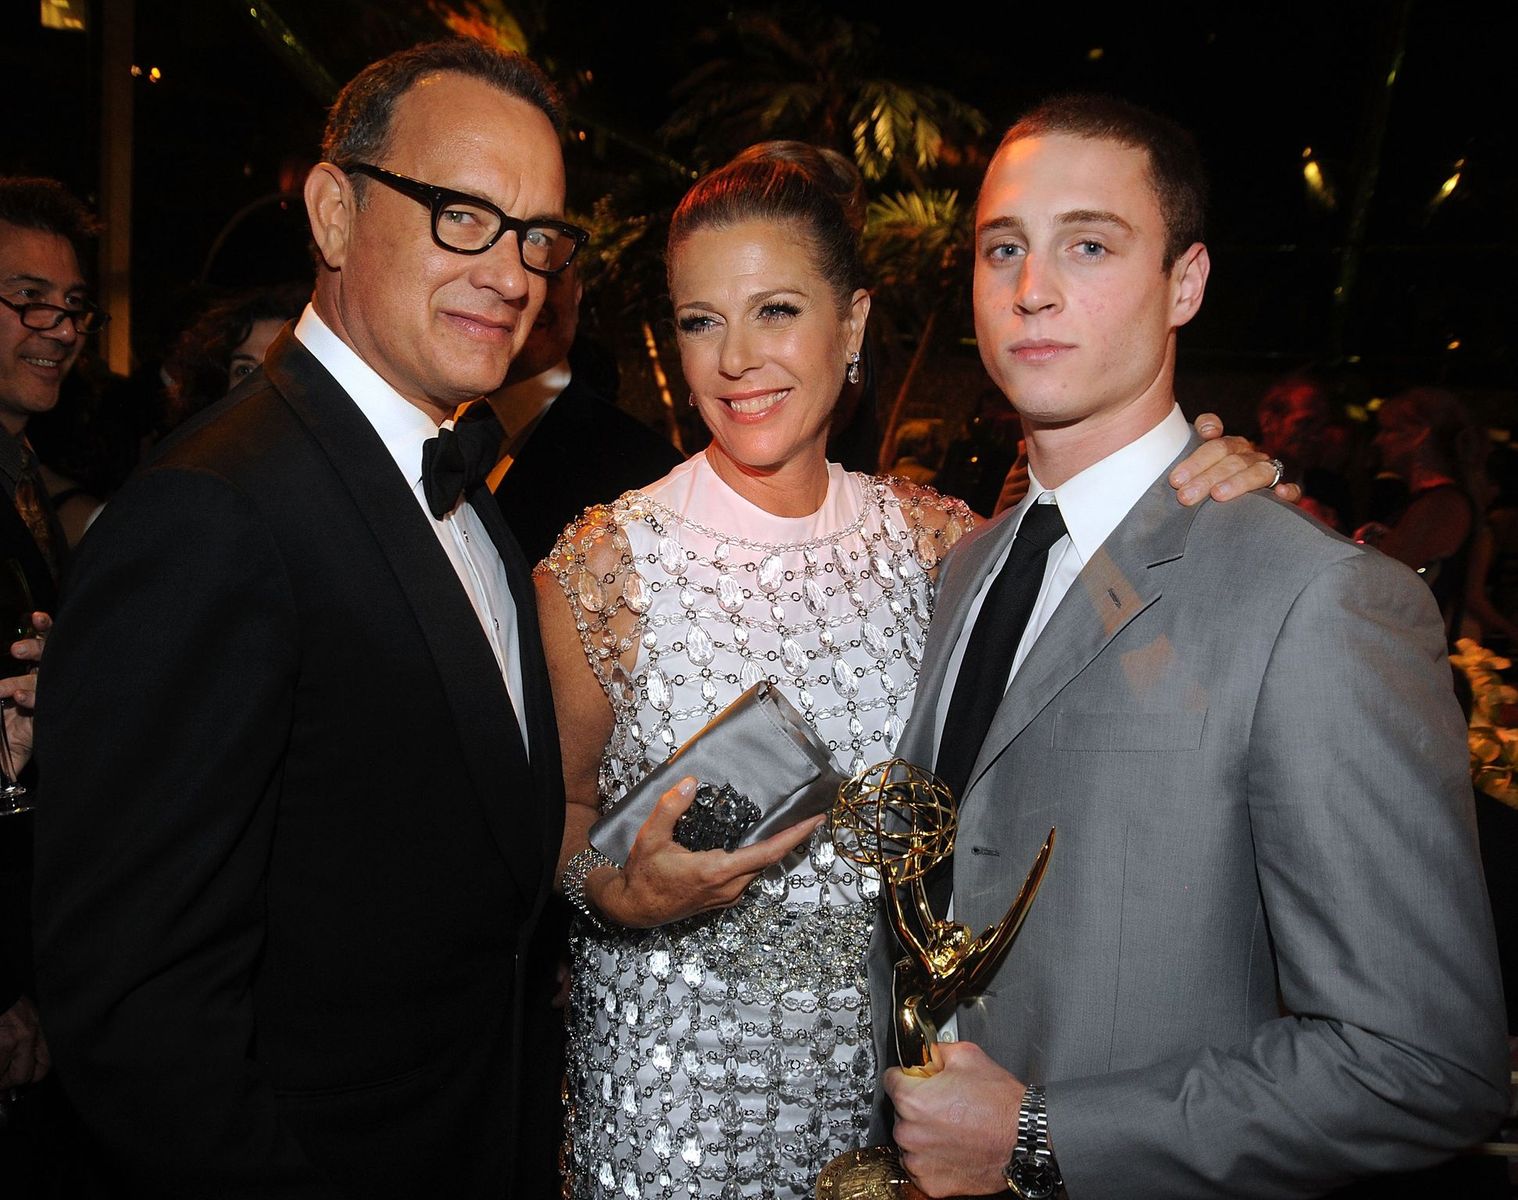 Producer/actor Tom Hanks, actress Rita Wilson and actor Chet Hanks at HBO's Annual Emmy Awards after party at the Pacific Design Center on August 29, 2010 | Photo: Getty Images